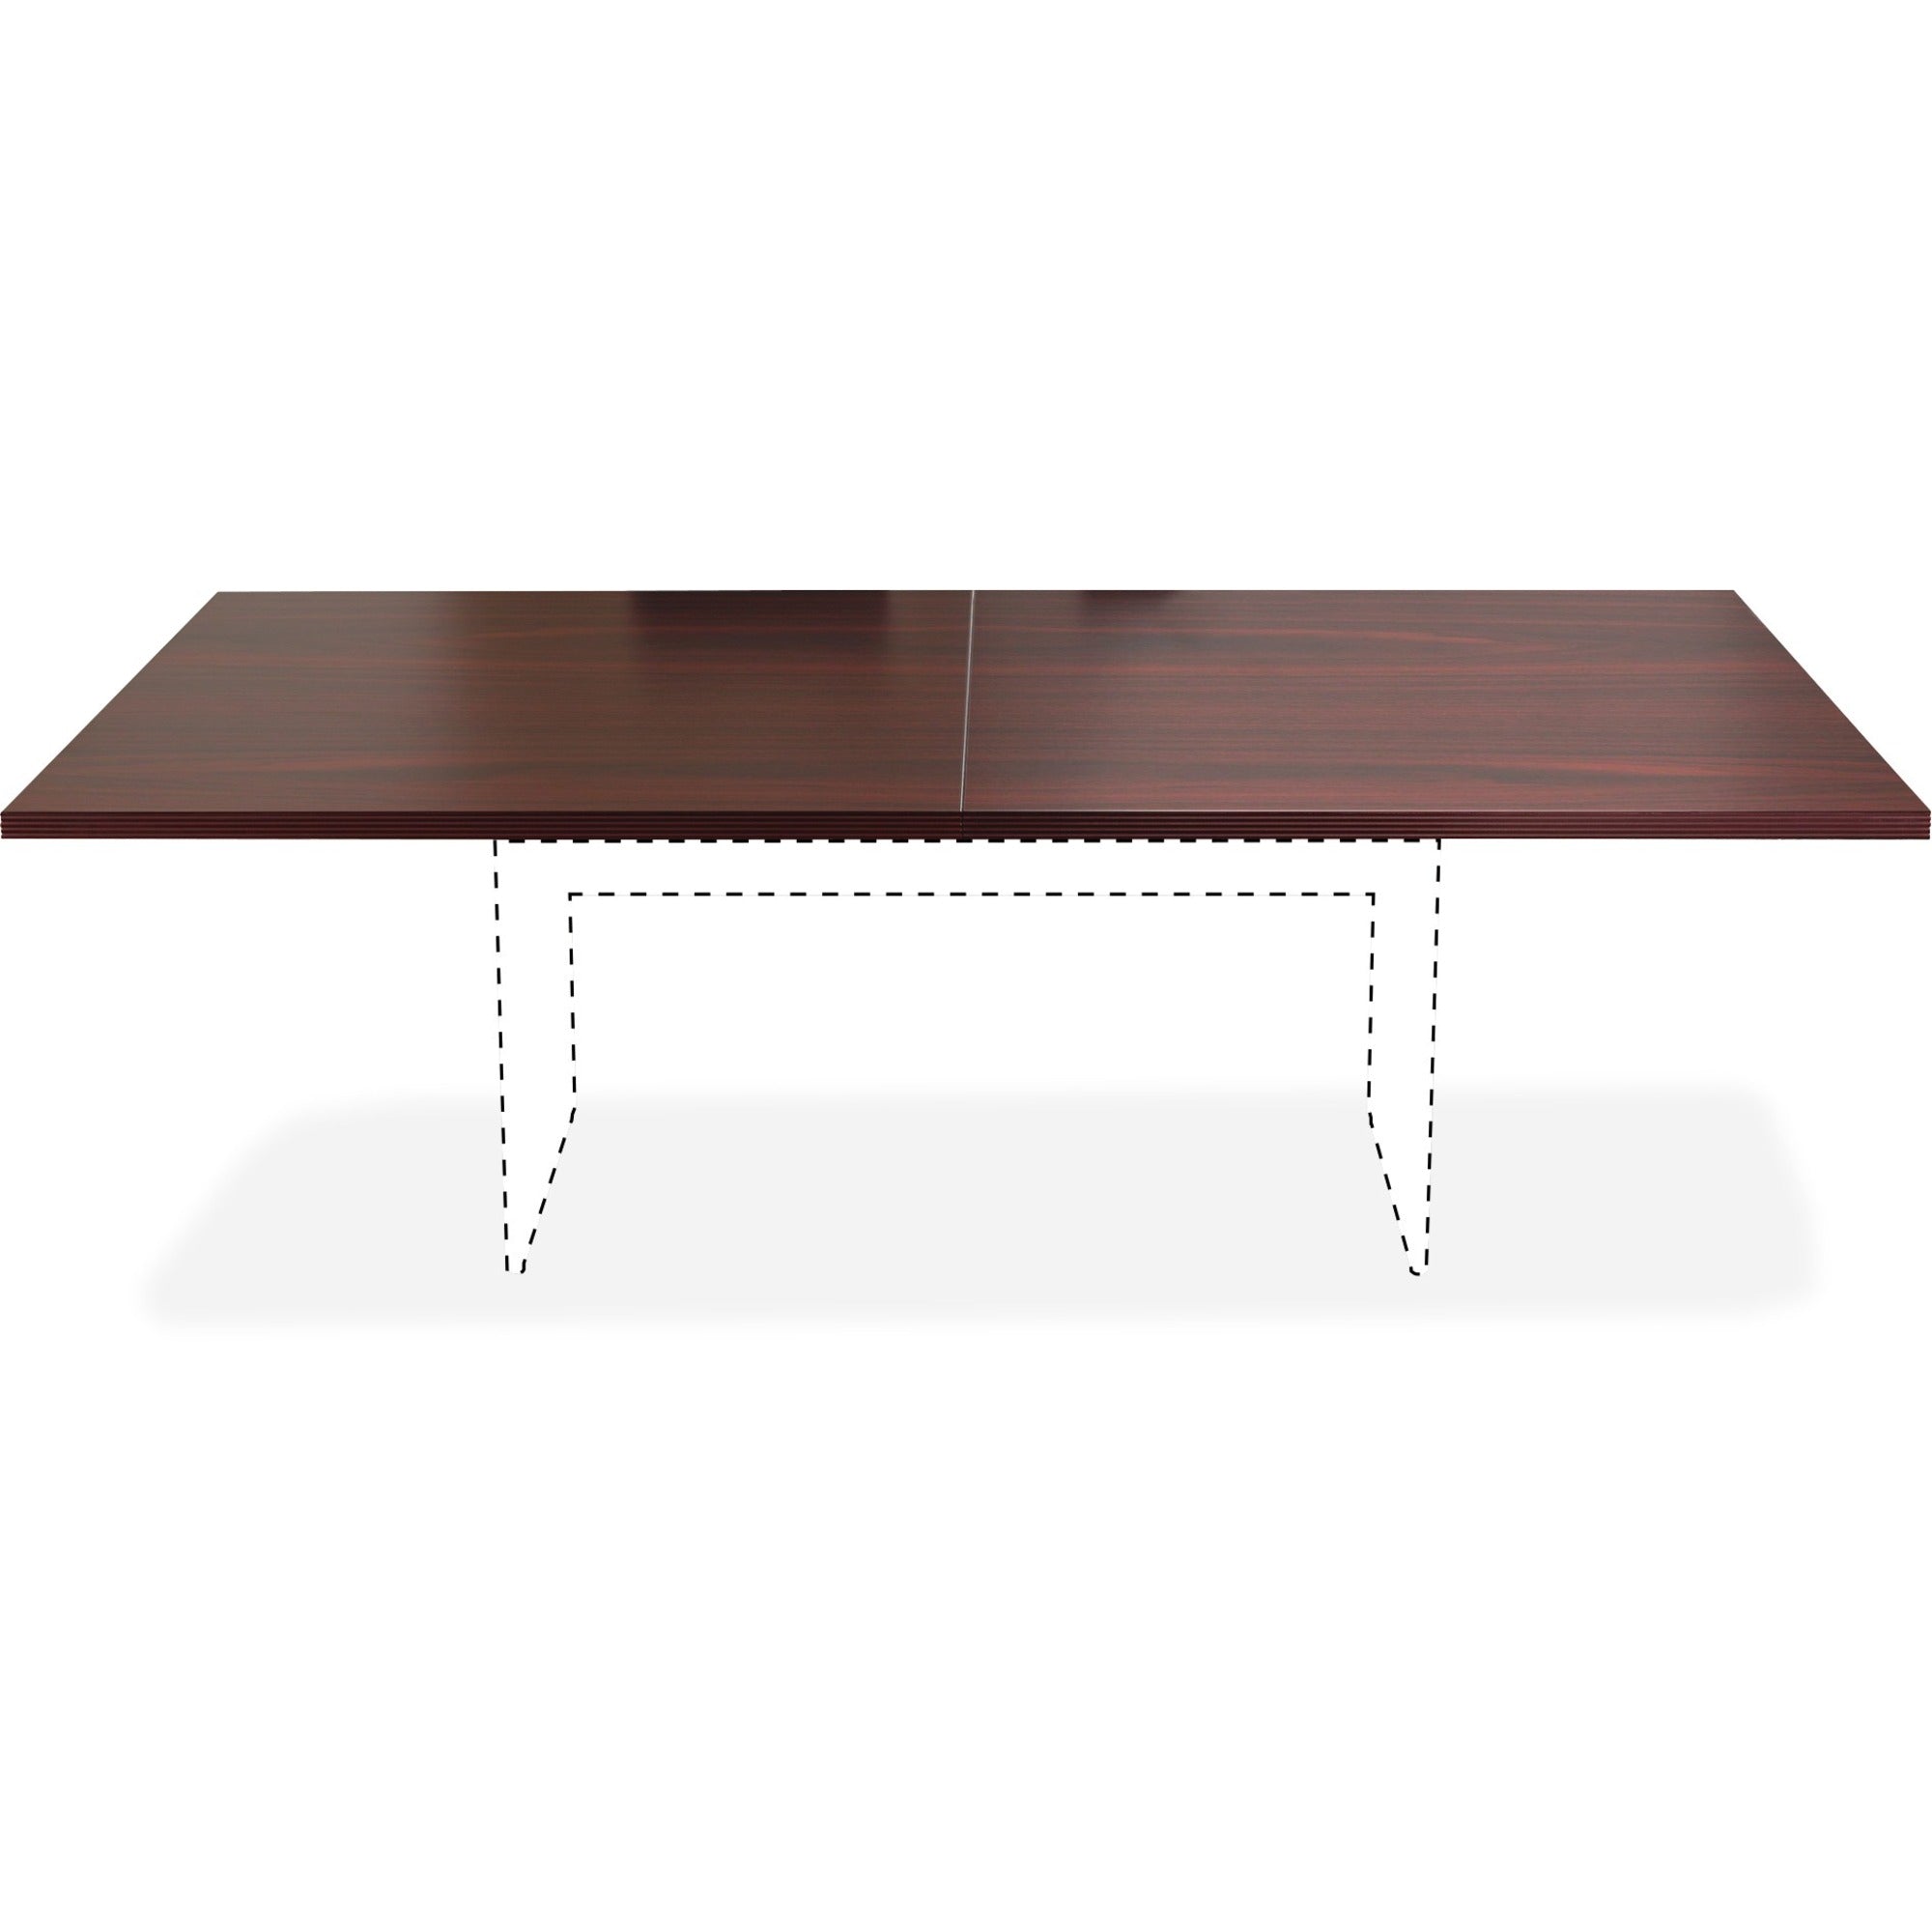 Lorell Chateau Series 8' Rectangular Tabletop - 94.5" x 47.3"1.4" - Reeded Edge - Material: P2 Particleboard - Finish: Mahogany Laminate - Durable - For Meeting - 